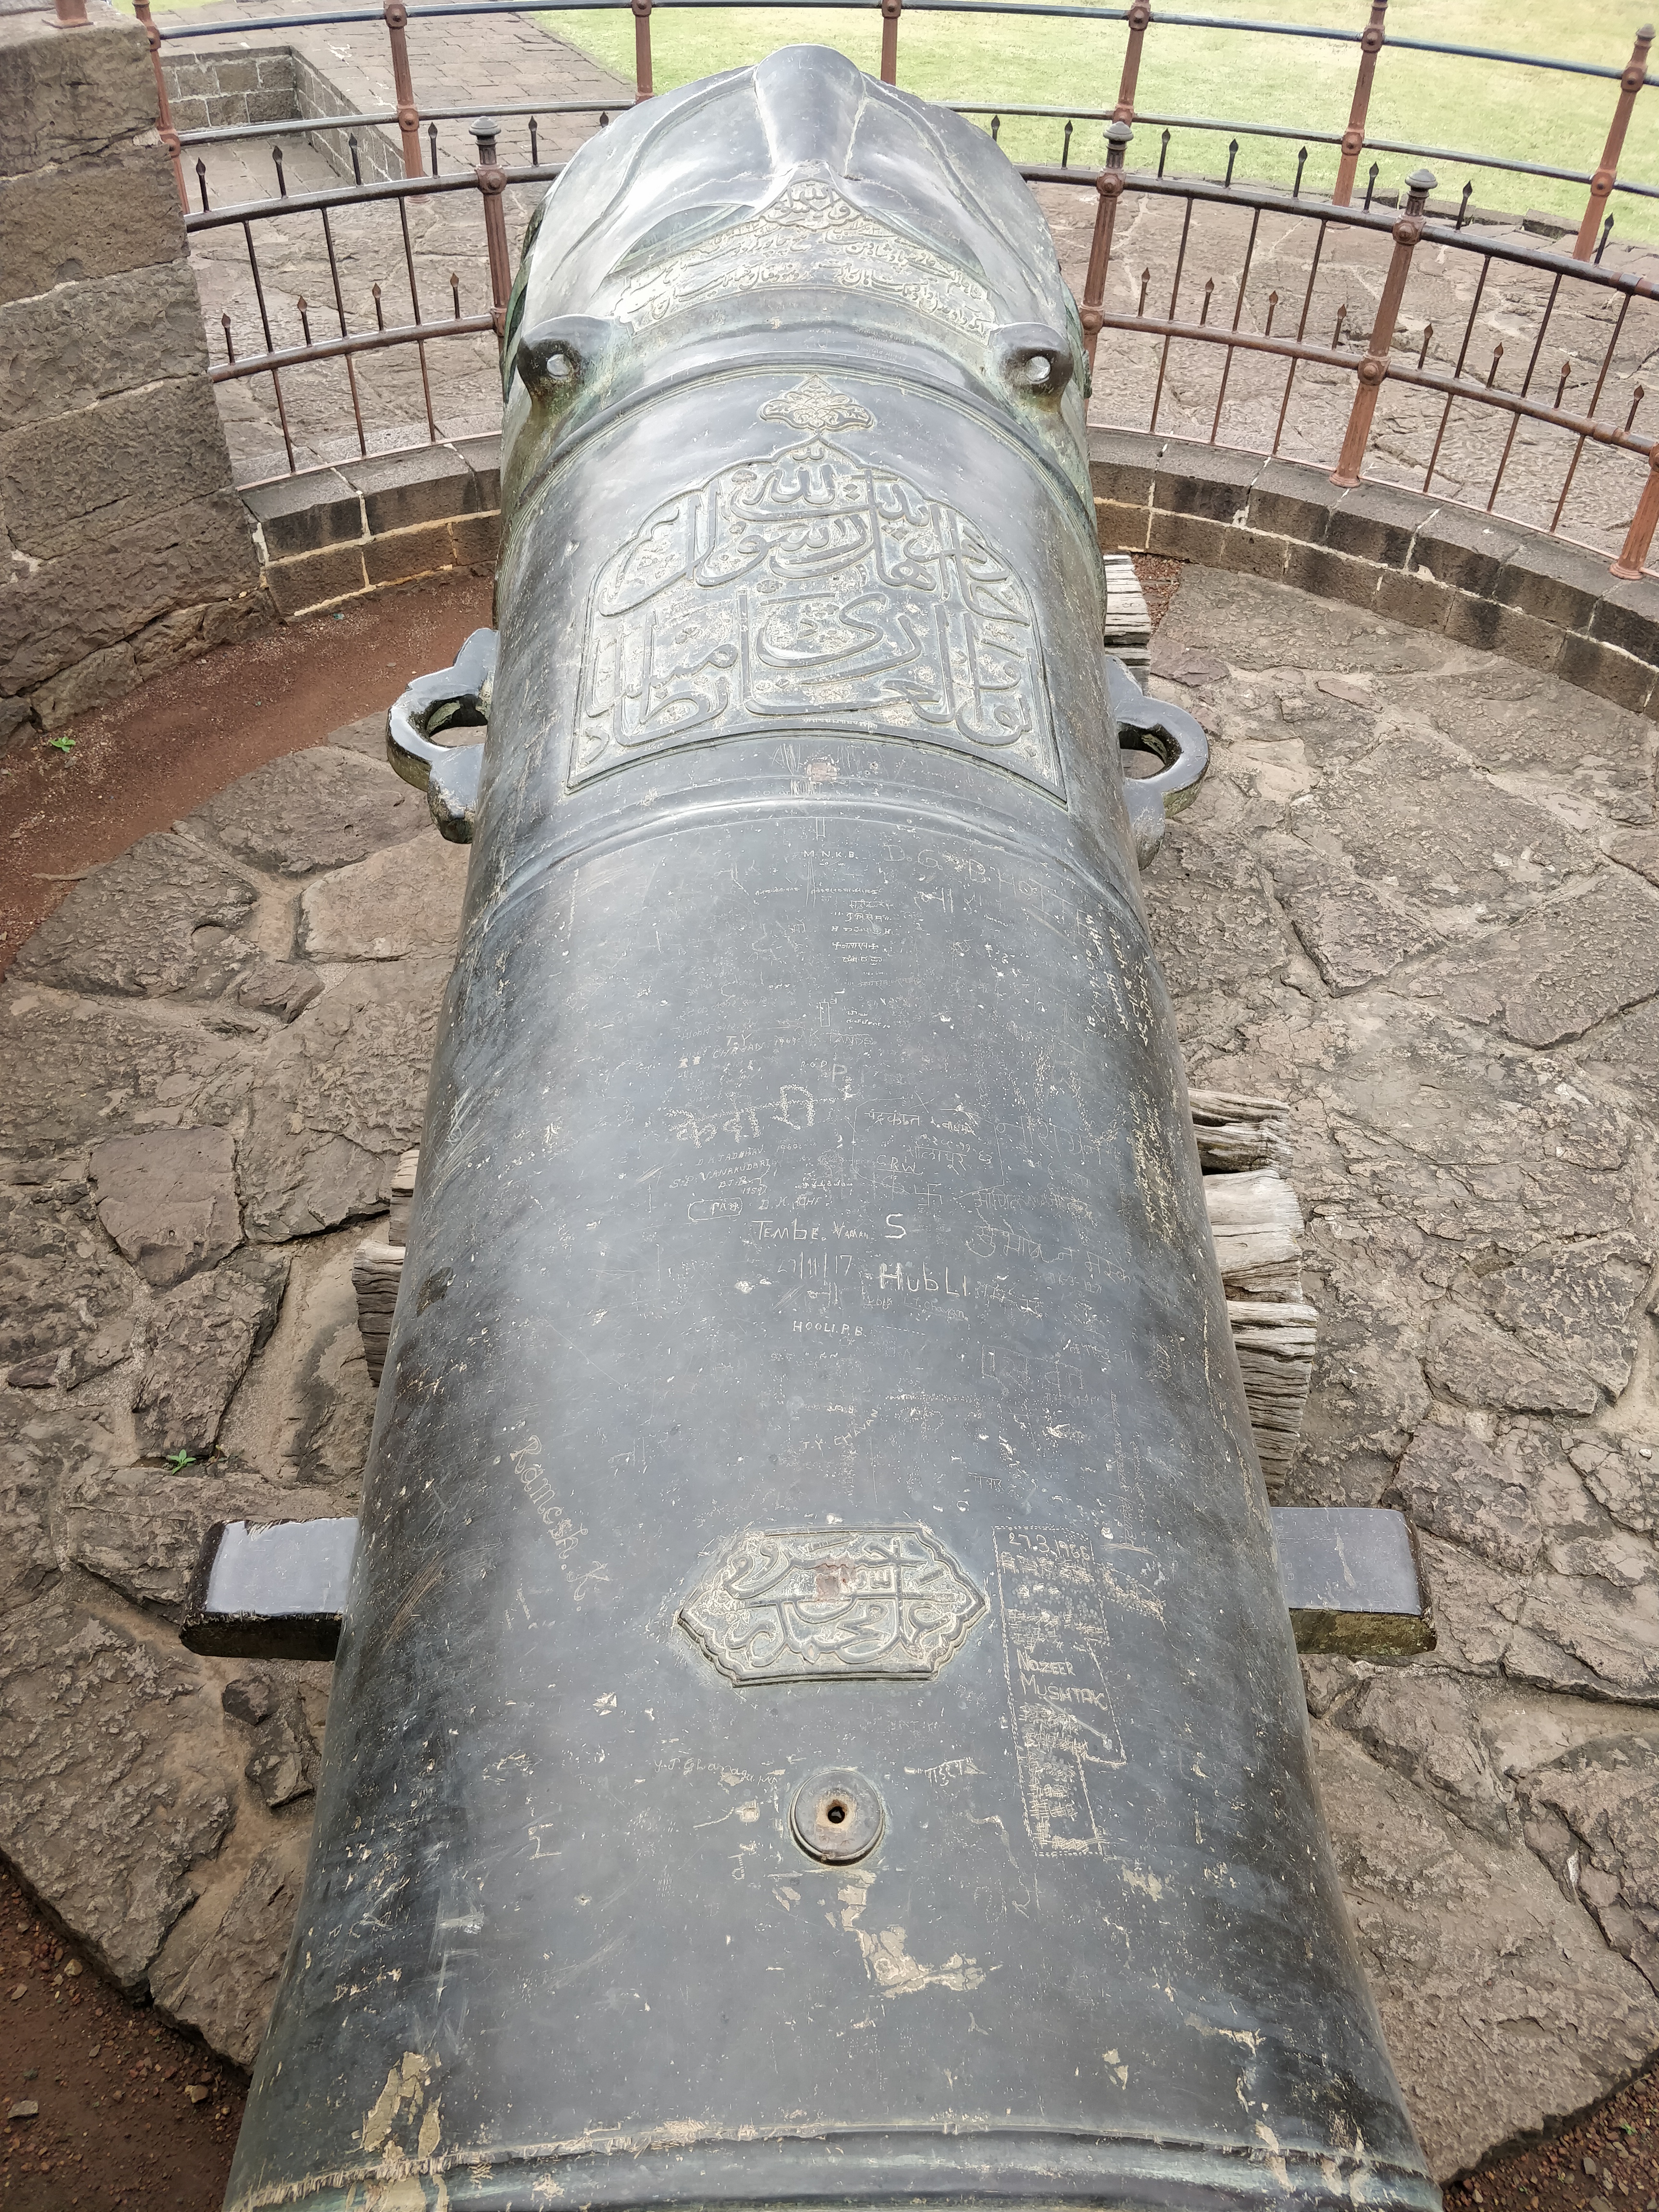 inscriptions on the cannon